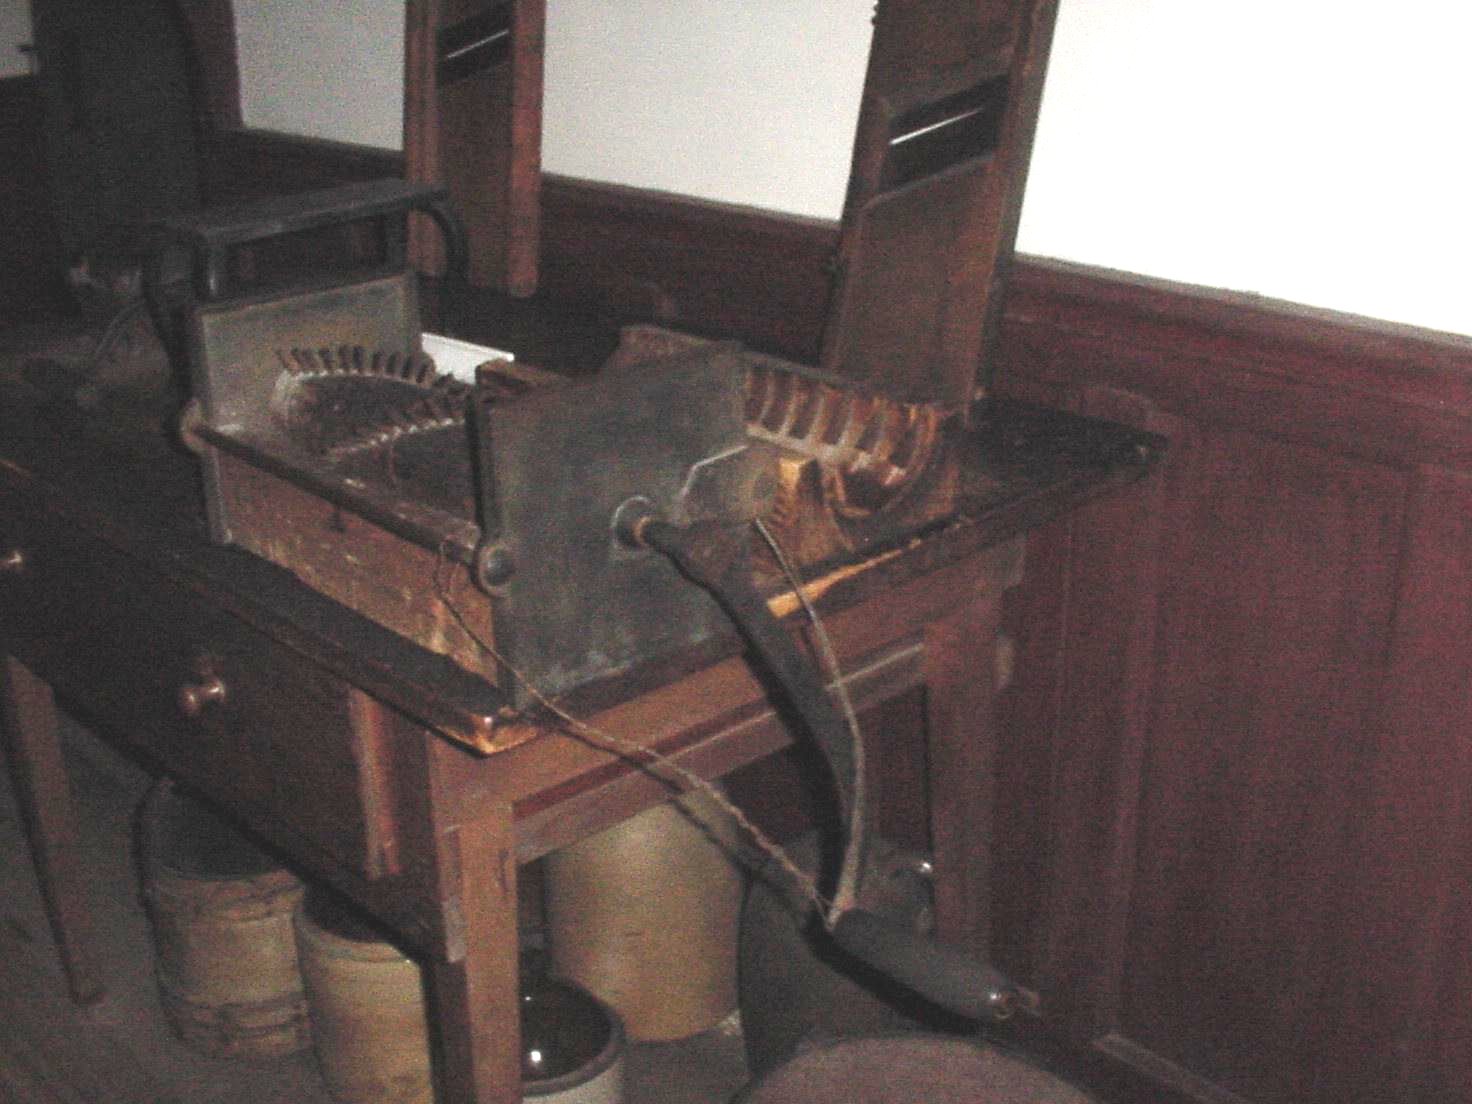 This is an early version of a food processor.